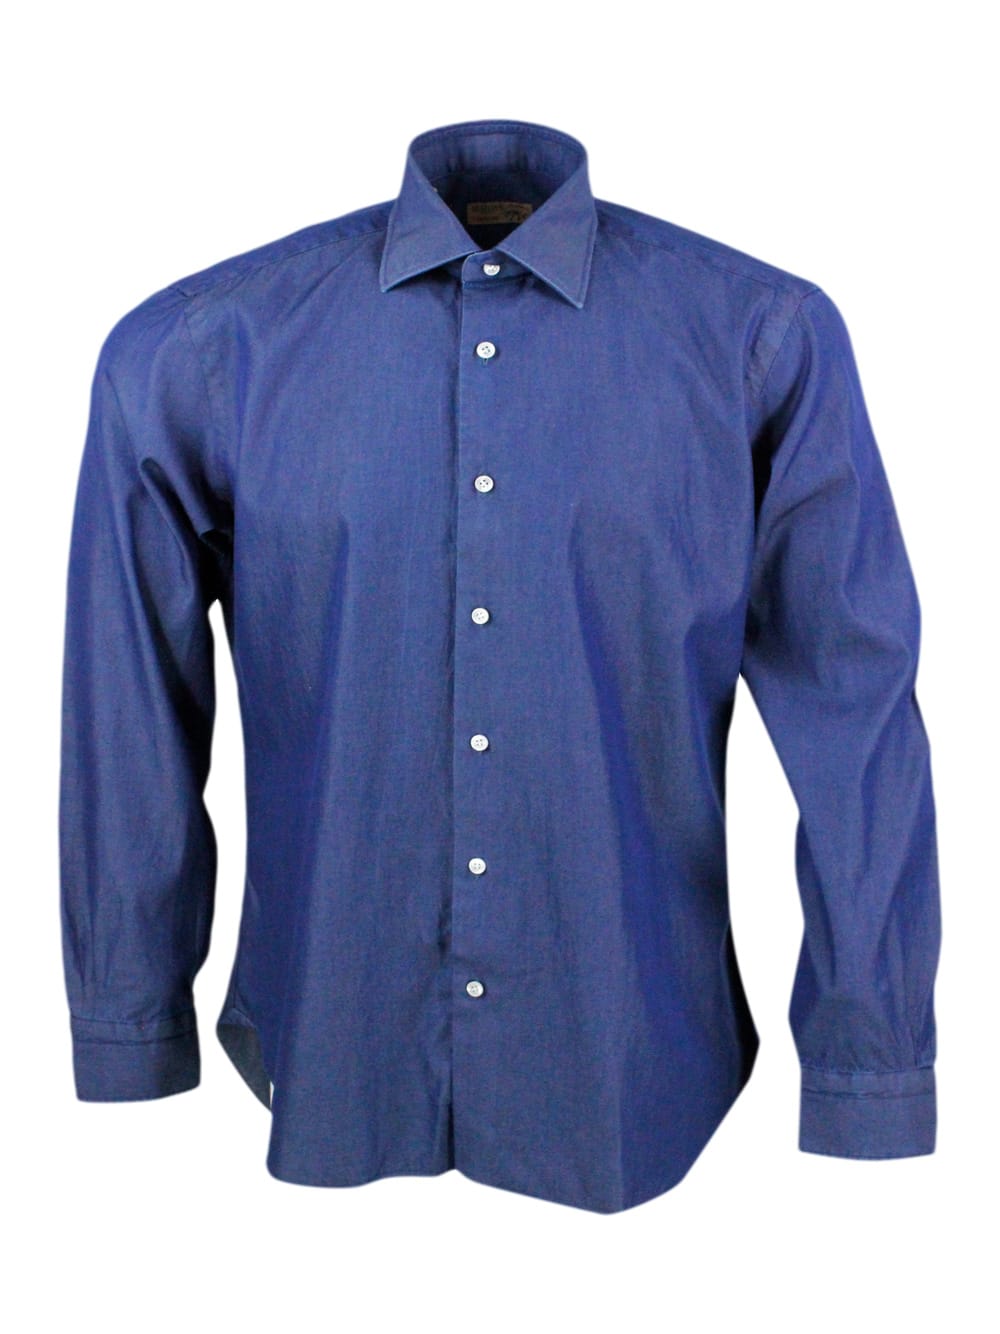 Dandylife Shirt In Light Denim With Hand-stitched Italian Collar And Mother-of-pearl Buttons